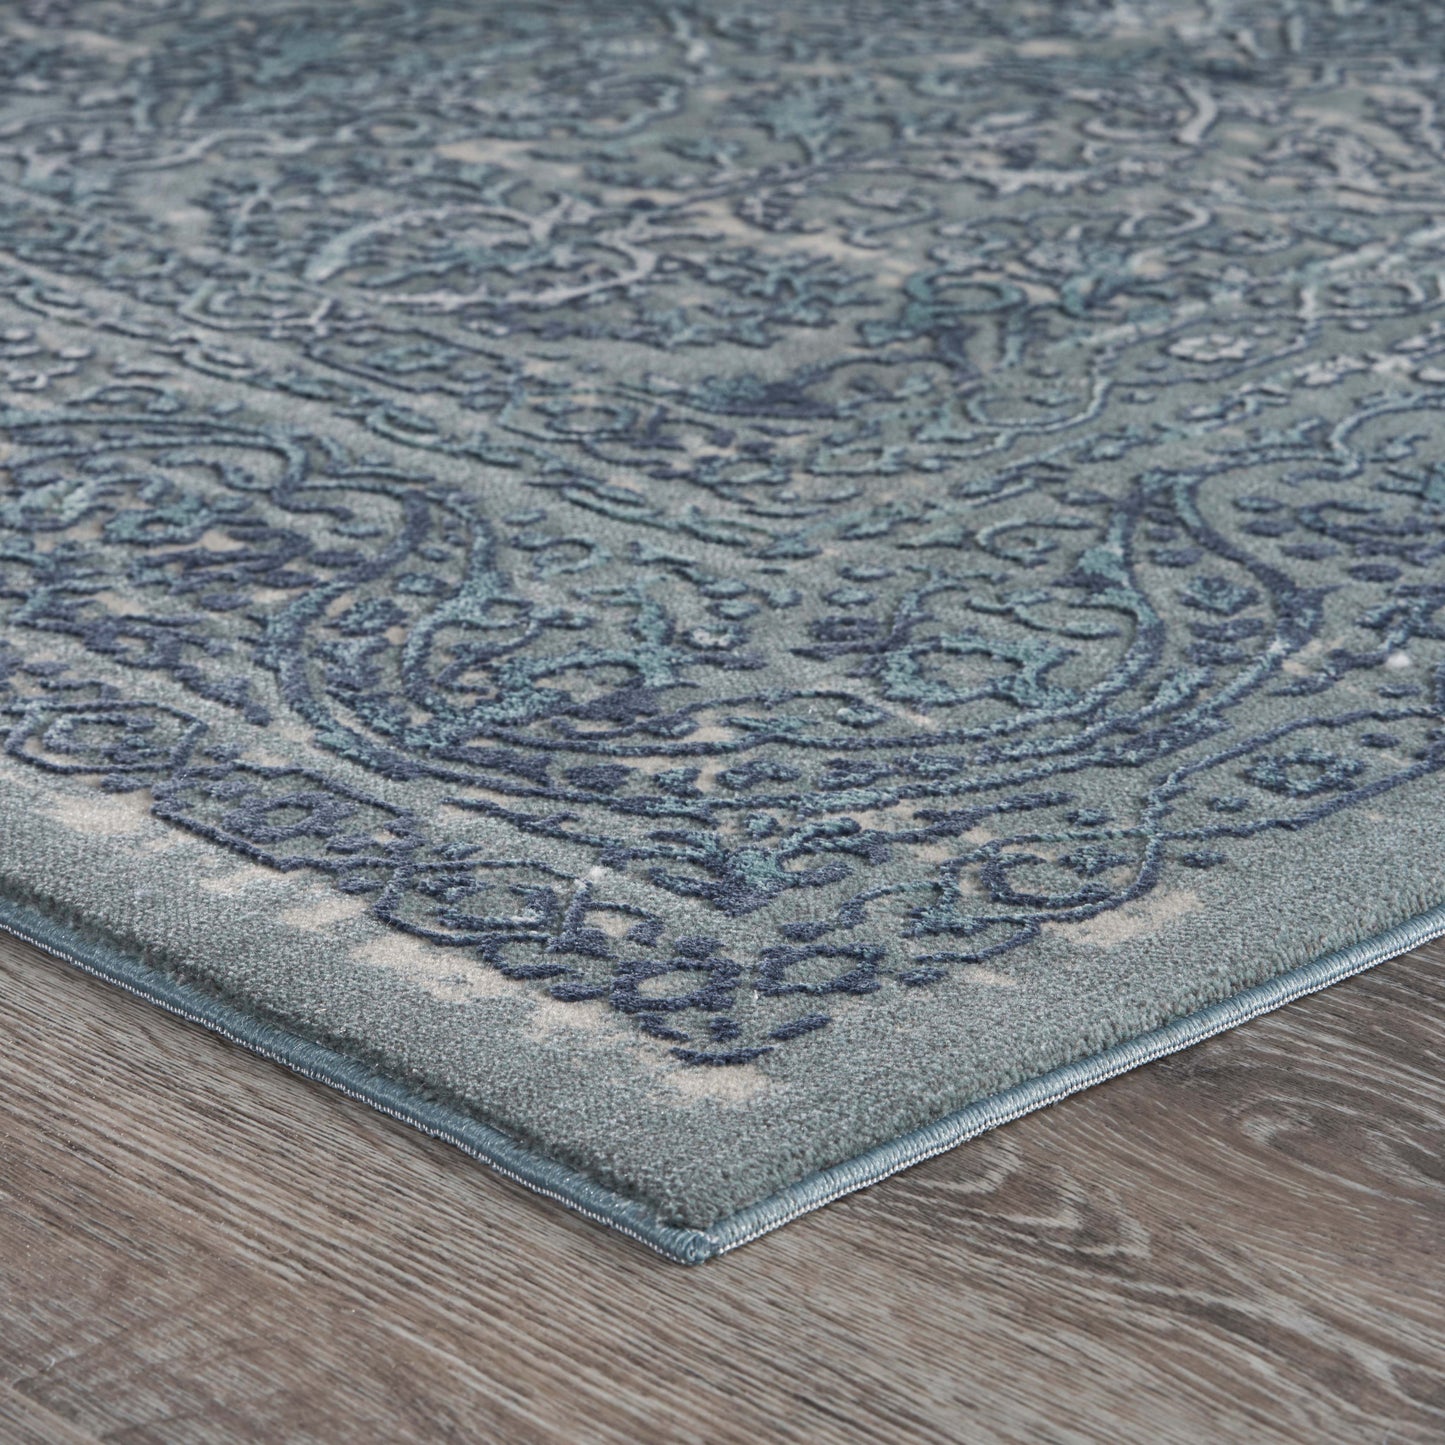 8' X 11' Blue Silver Gray And Cream Damask Distressed Stain Resistant Area Rug